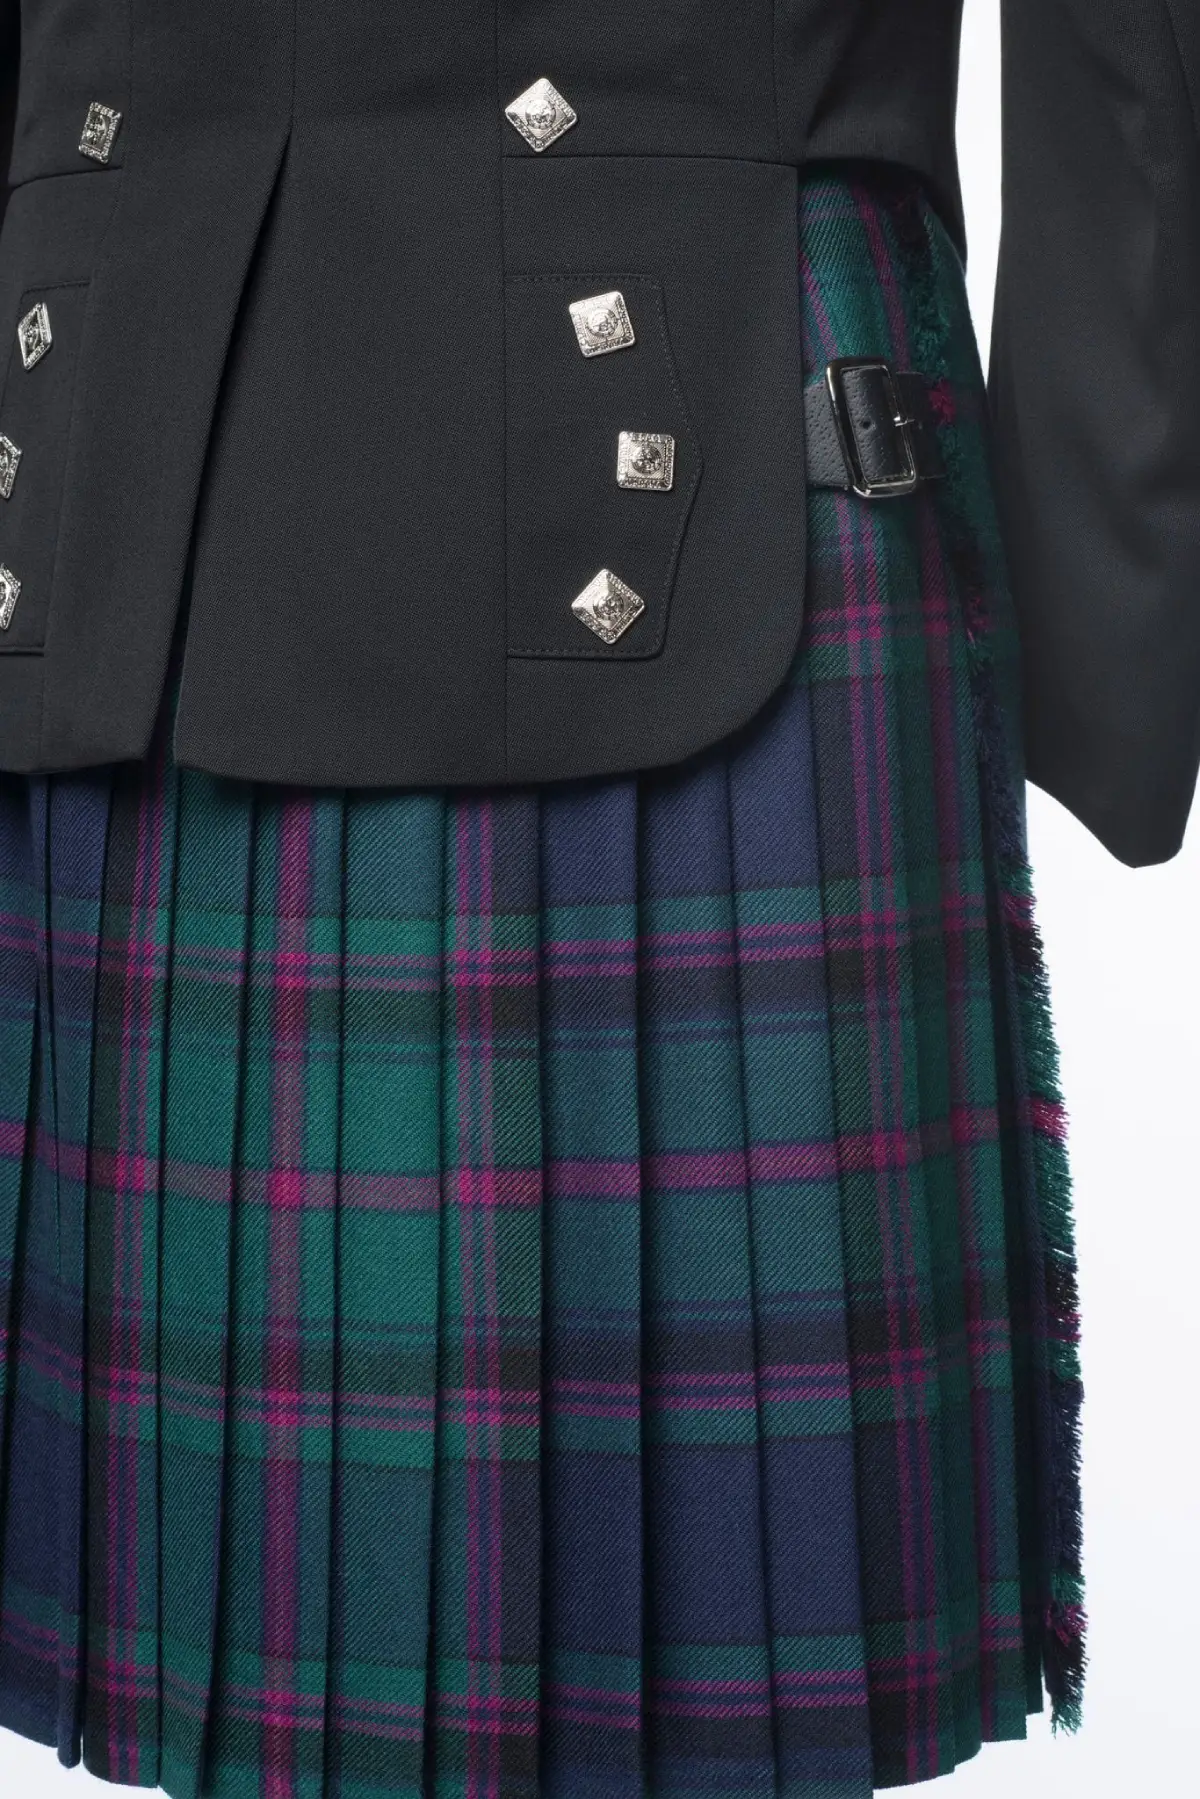 Prince-Charlie-Kilt-Outfit-with-5-button-vest6